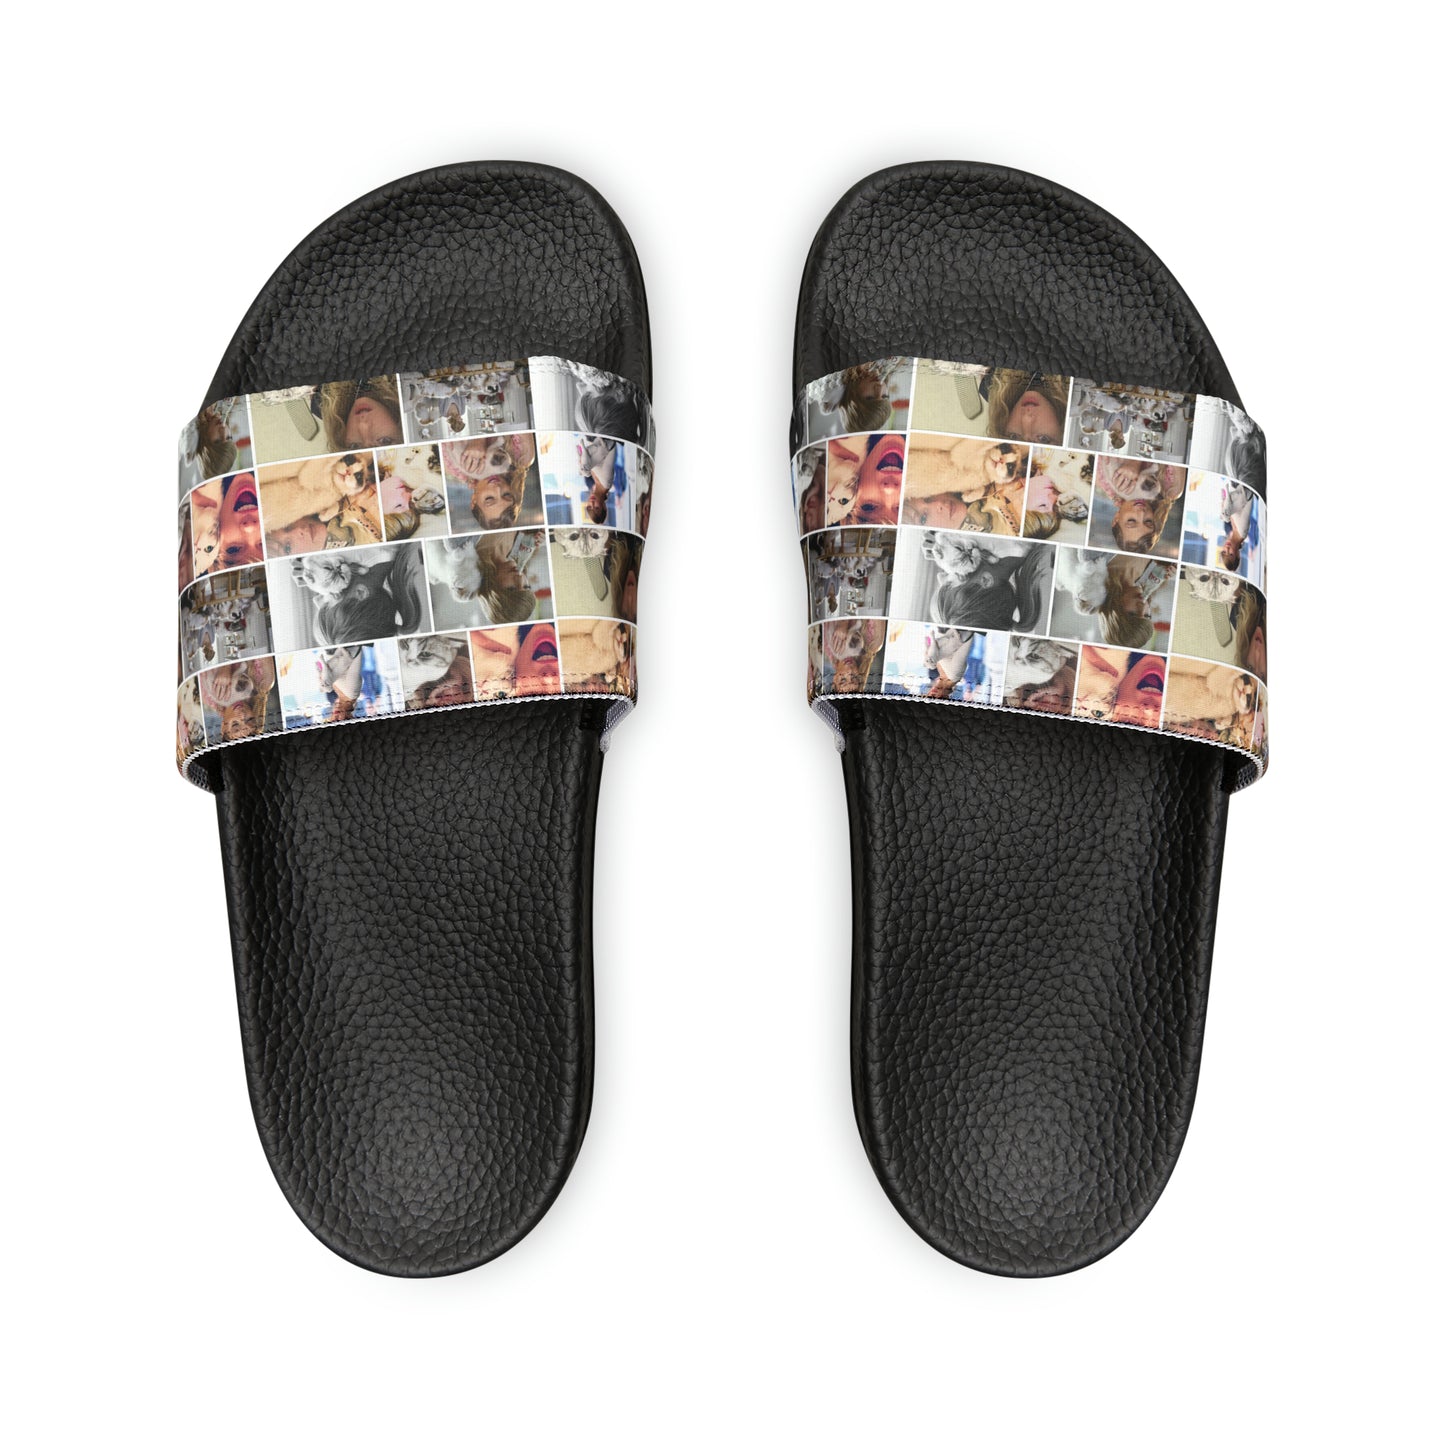 Taylor Swift's Cats Collage Pattern Women's Slide Sandals